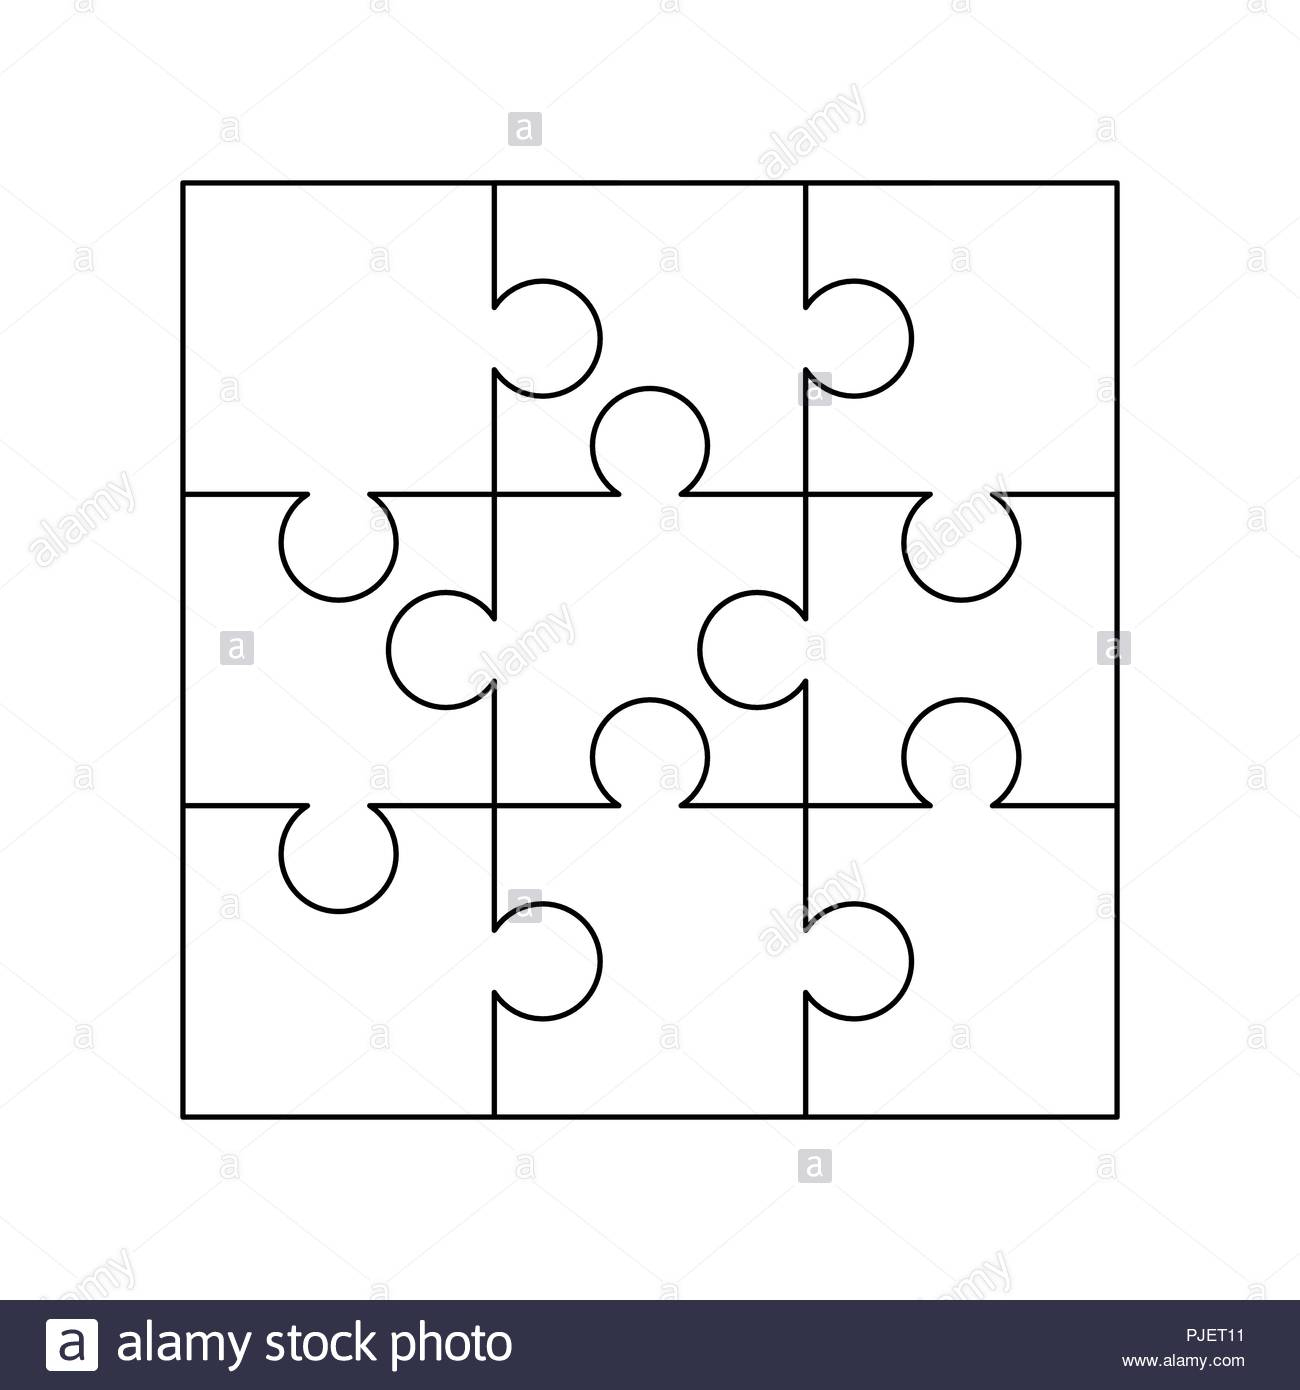 9 White Puzzles Pieces Arranged In A Square. Jigsaw Puzzle Template - Print On Puzzle Pieces